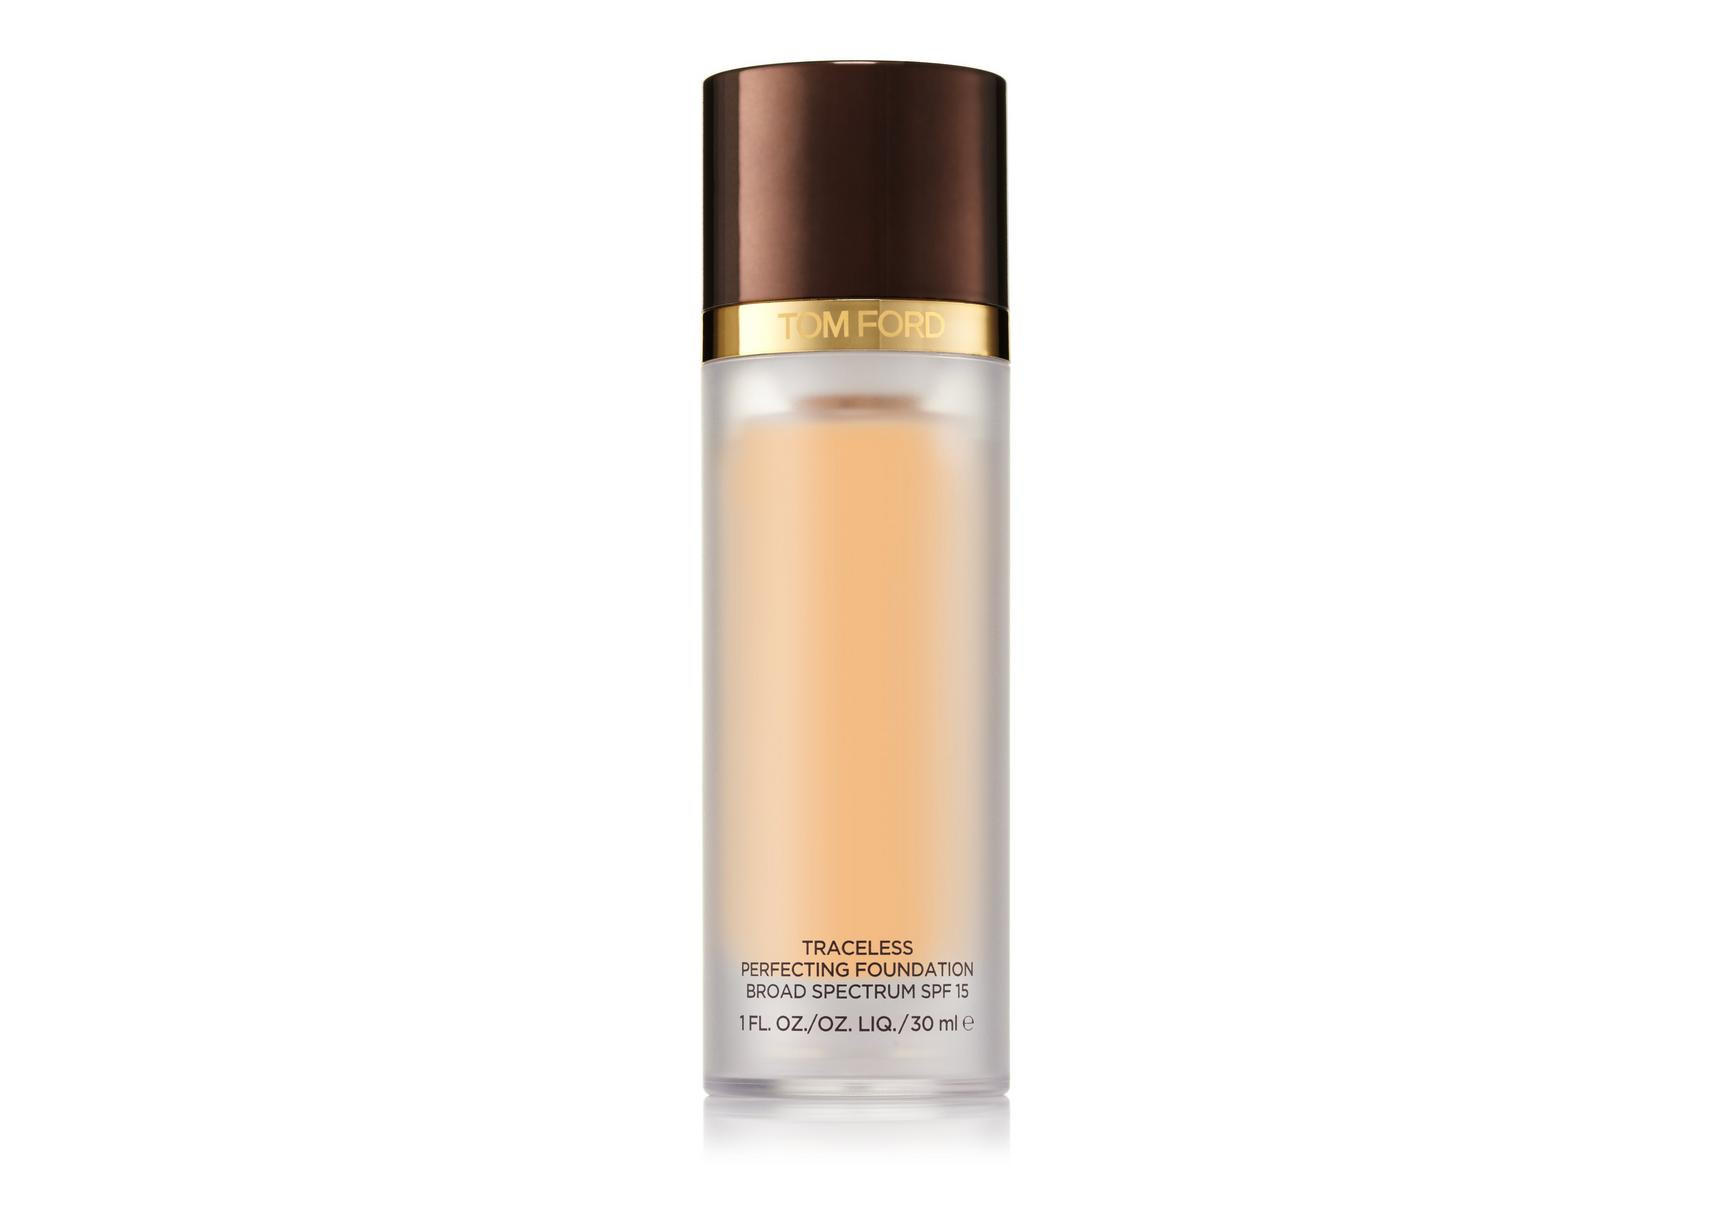 Tom Ford Traceless Perfecting Foundation SPF 15 Buff 2.0